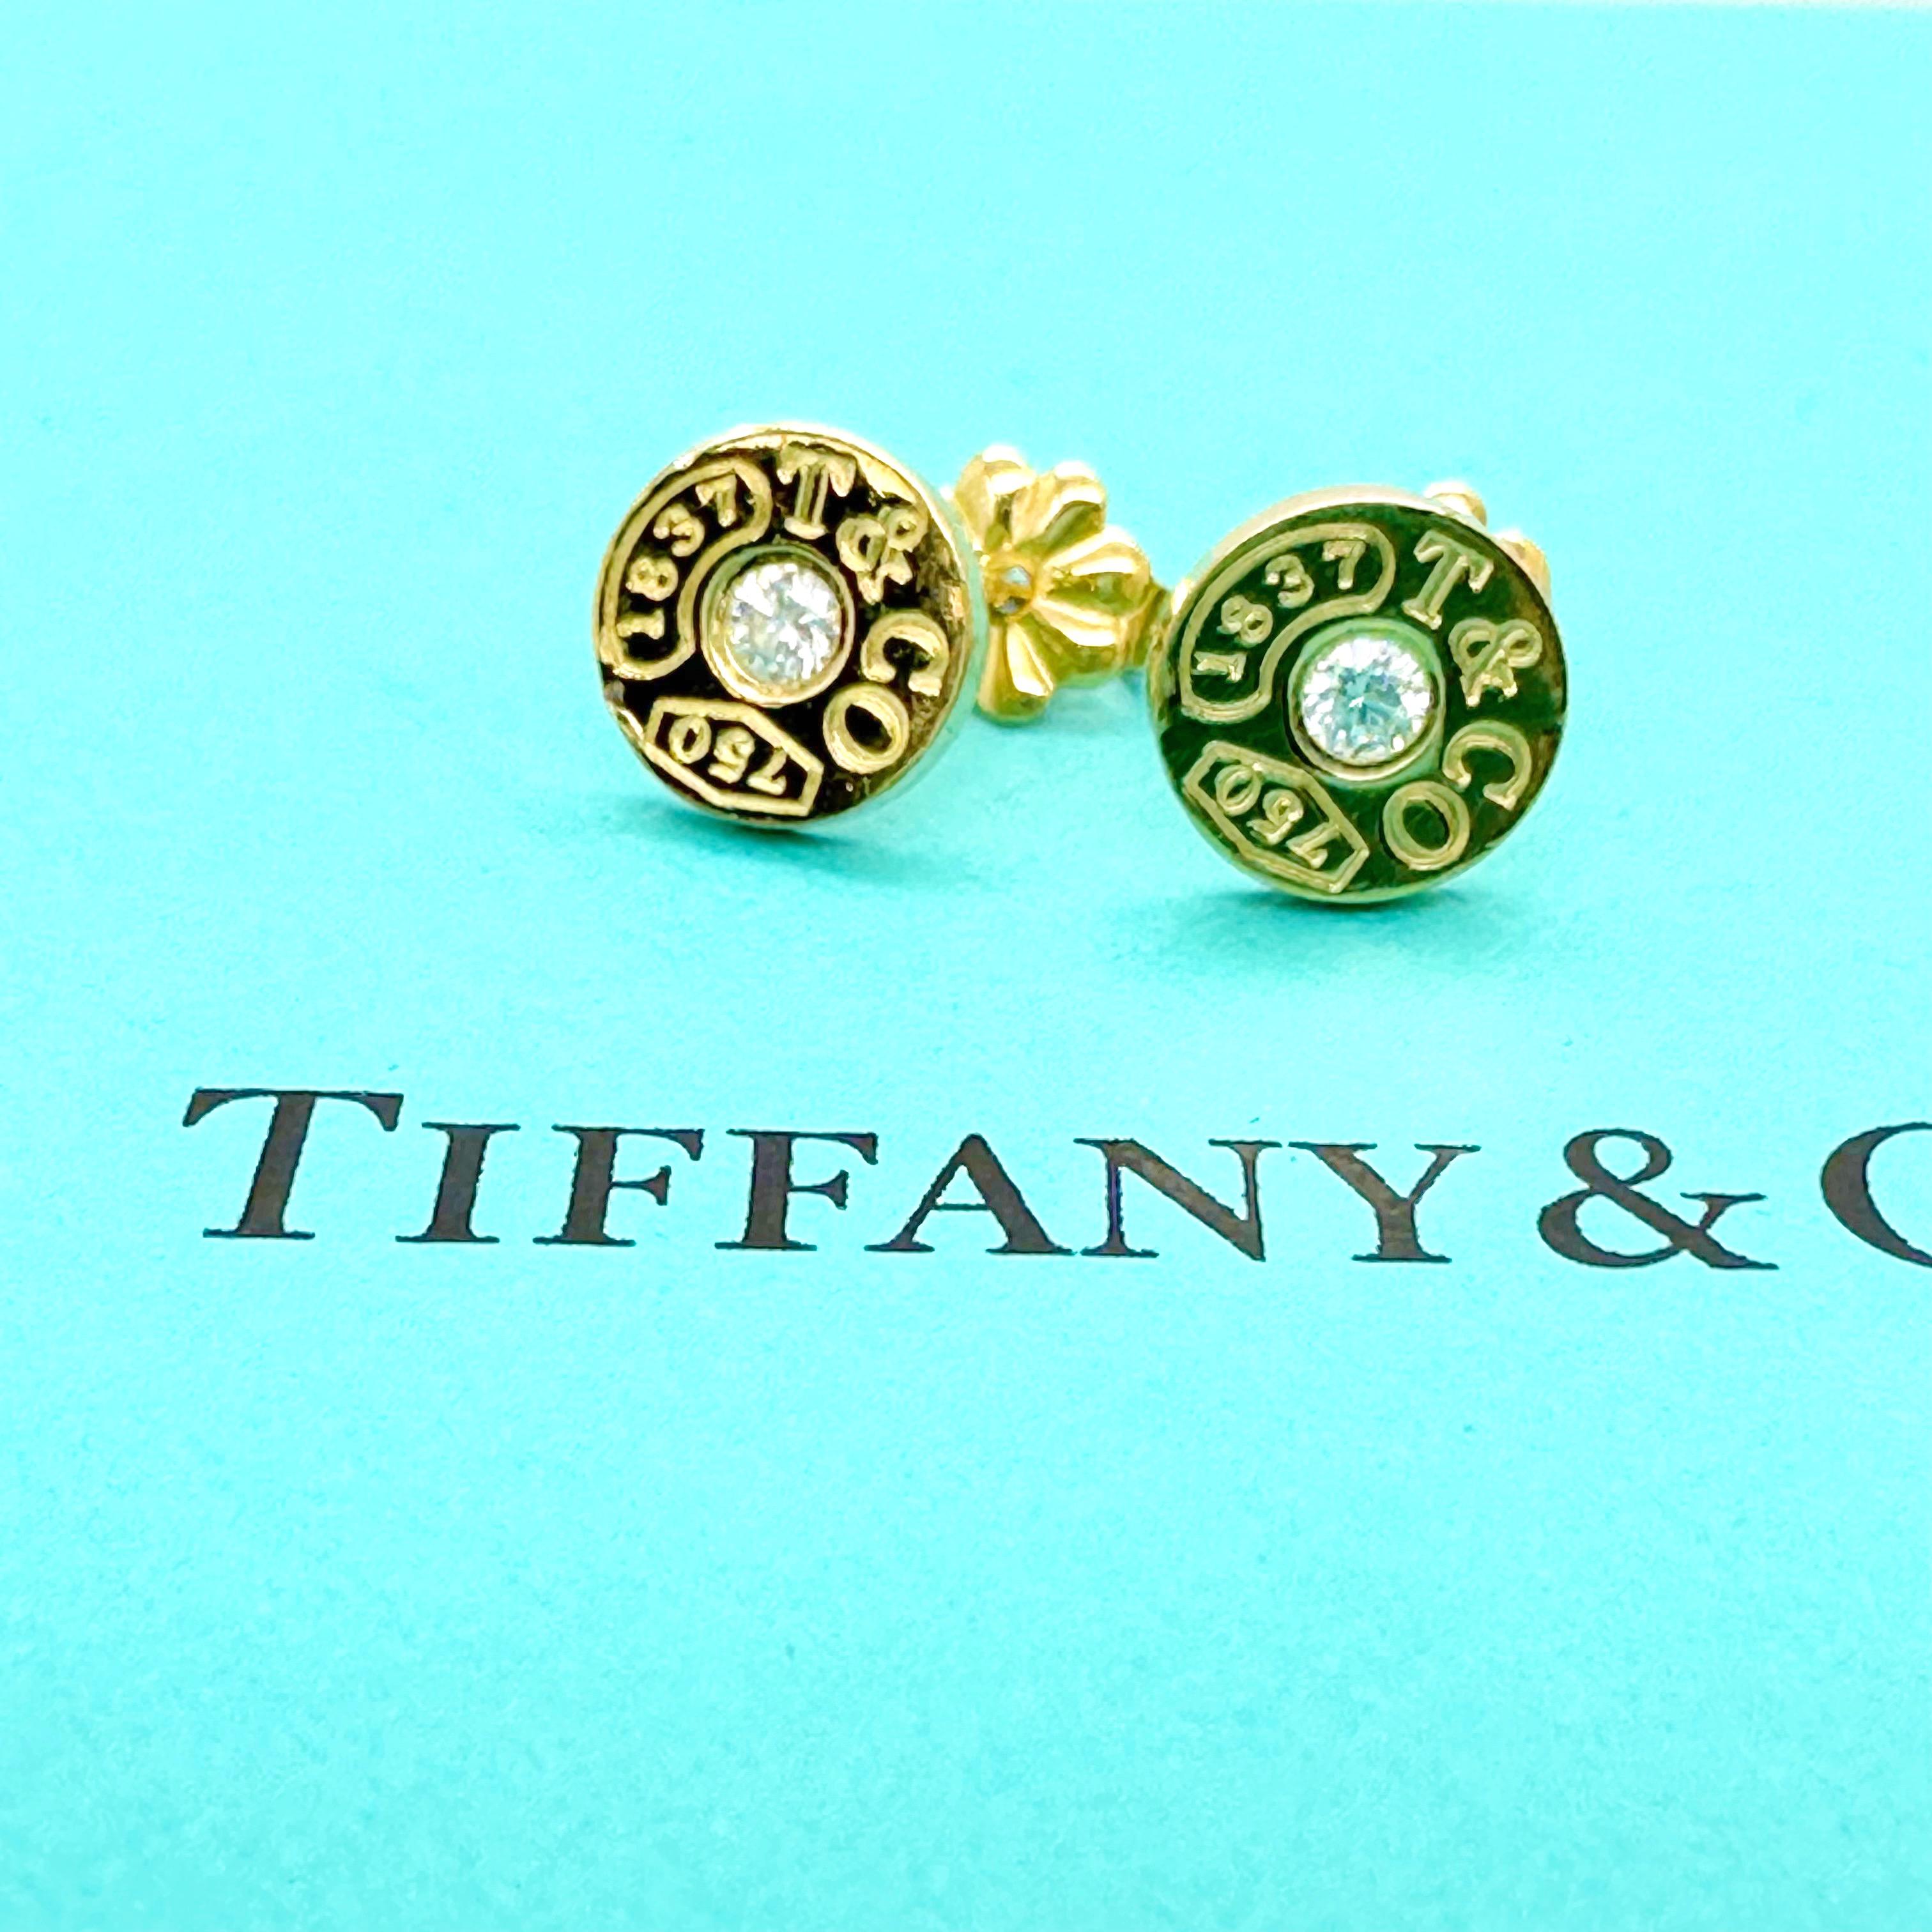 Tiffany & Co. 1837 Circle Earrings
Style:  Bezel Set Studs
Ref. number:  #60011276
Metal:  18kt Yellow Gold
Size / Measurements:  Small ~ 8 mm Diameter
Main Diamond:  Round Brilliant Diamonds
Hallmark:  1837 T&Co750 on front of earrings - T&Co Au750